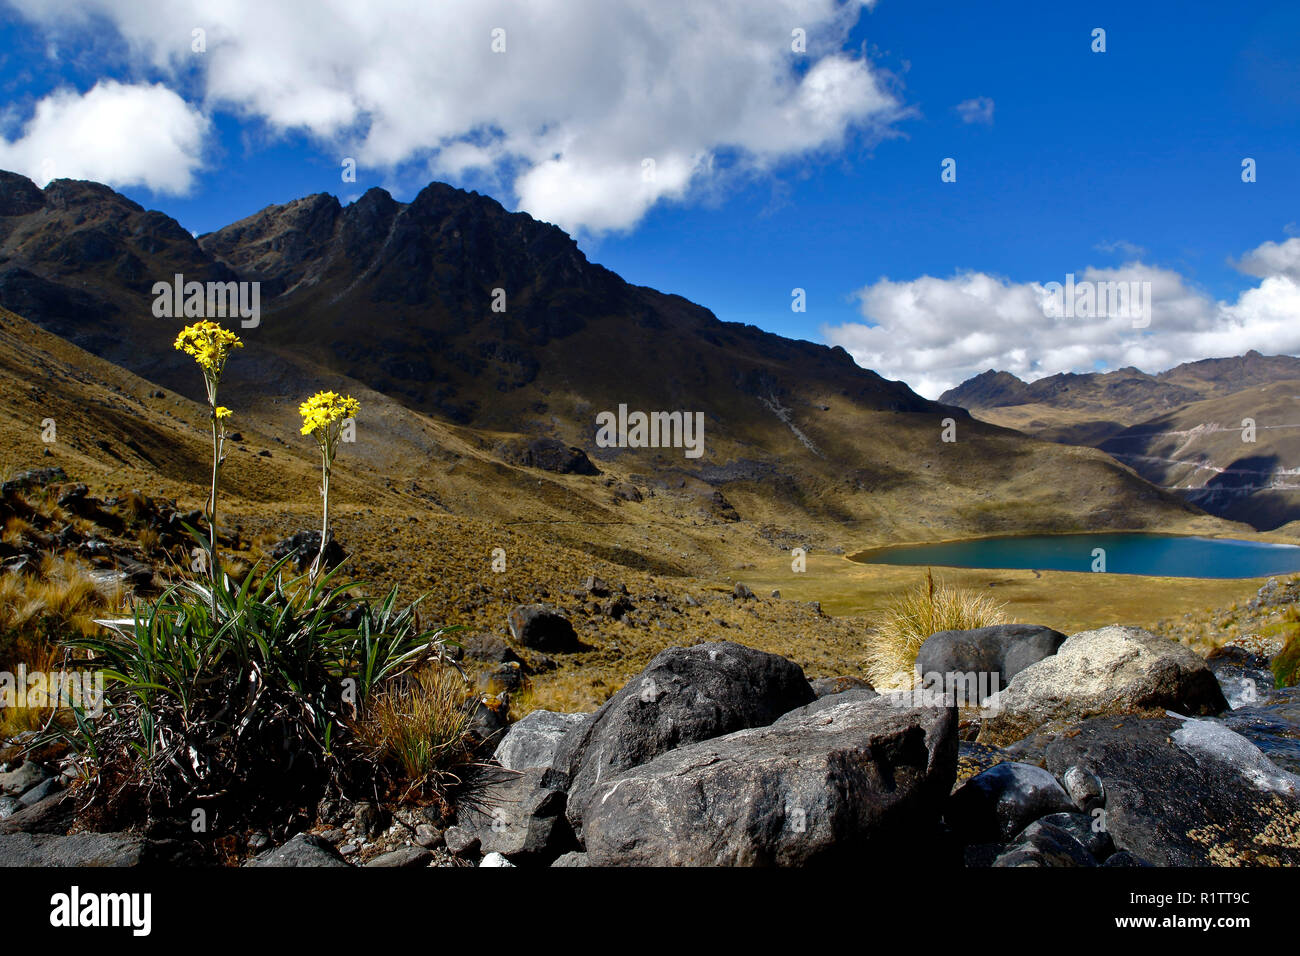 Beautiful Andean landscape seen from the Huaytapallana mountain range, in the foreground a native flower (senecio sp.) And a lagoon. Stock Photo